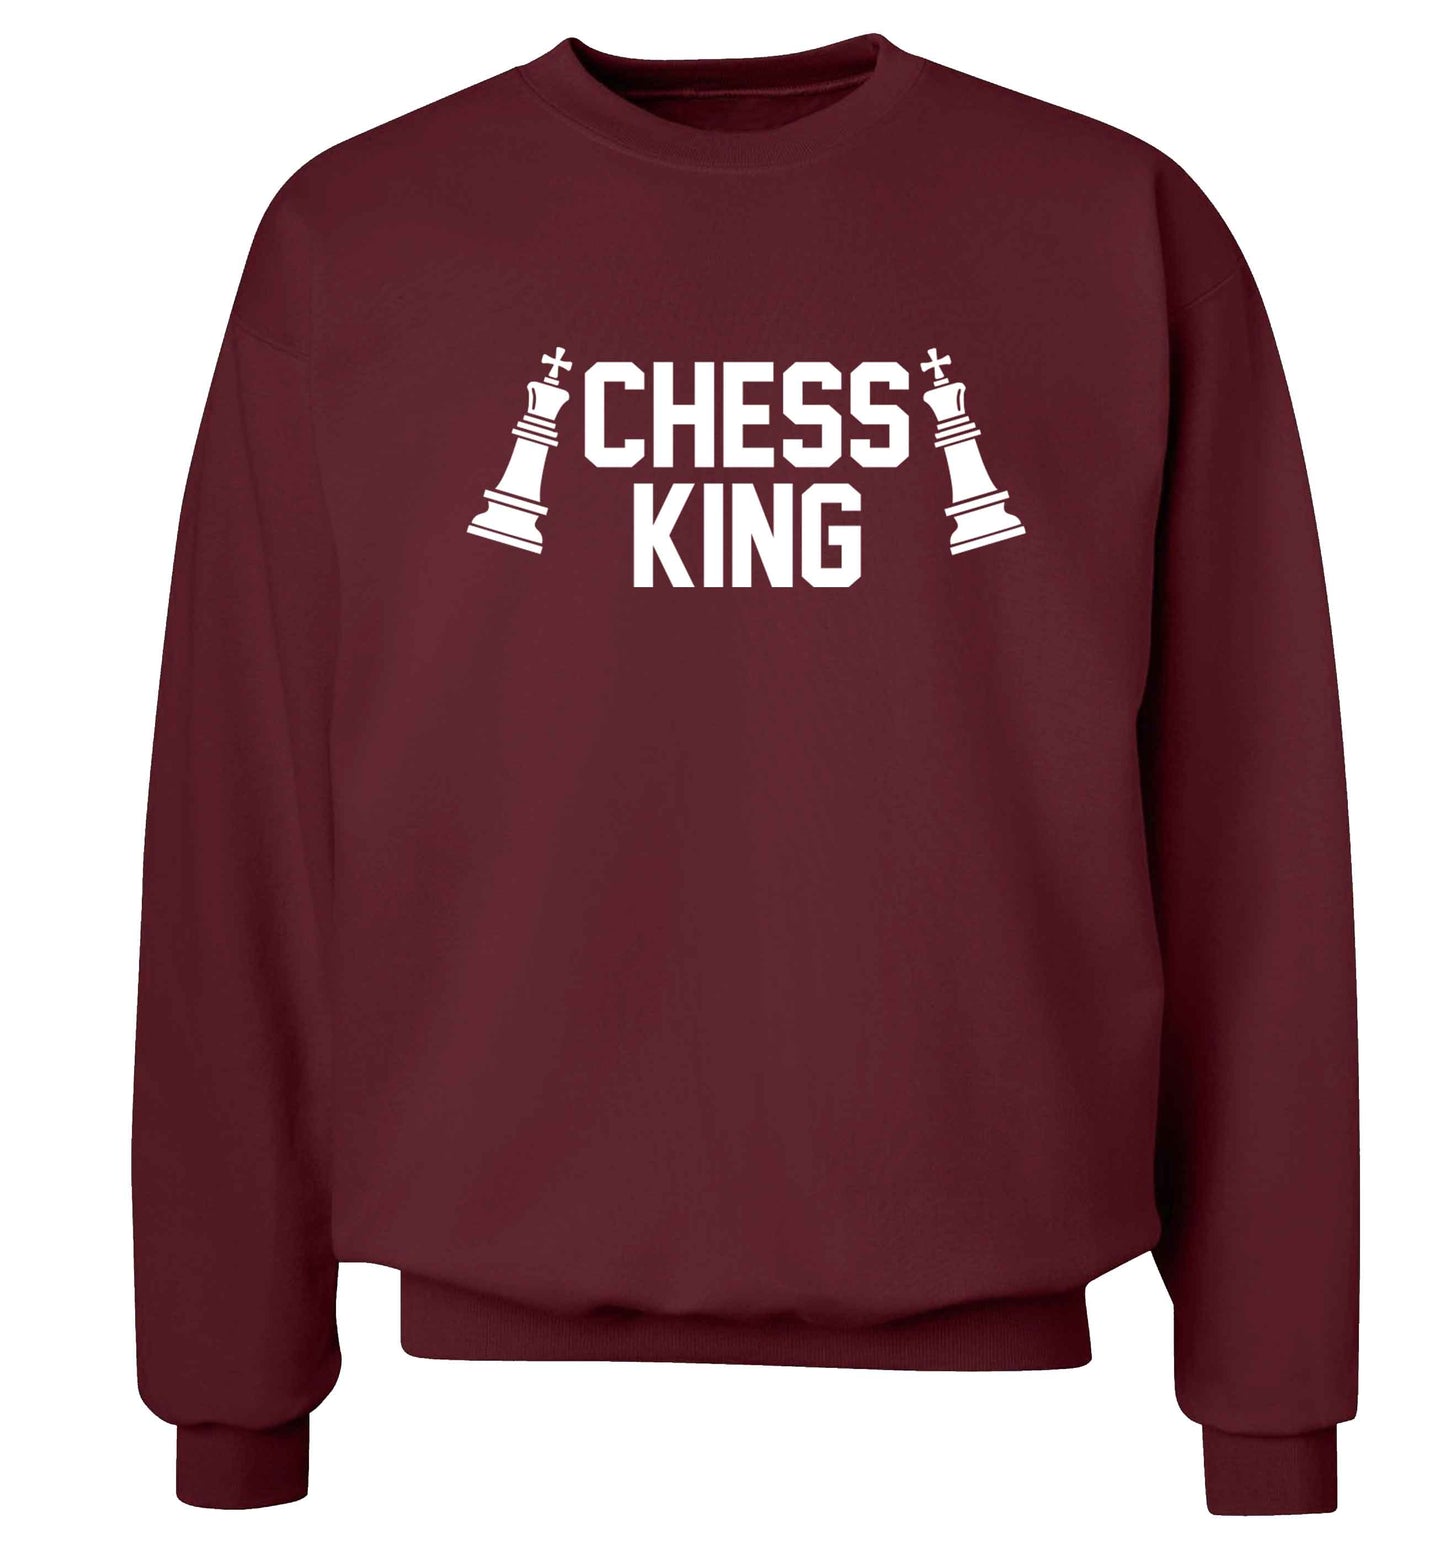 Chess king Adult's unisex maroon Sweater 2XL